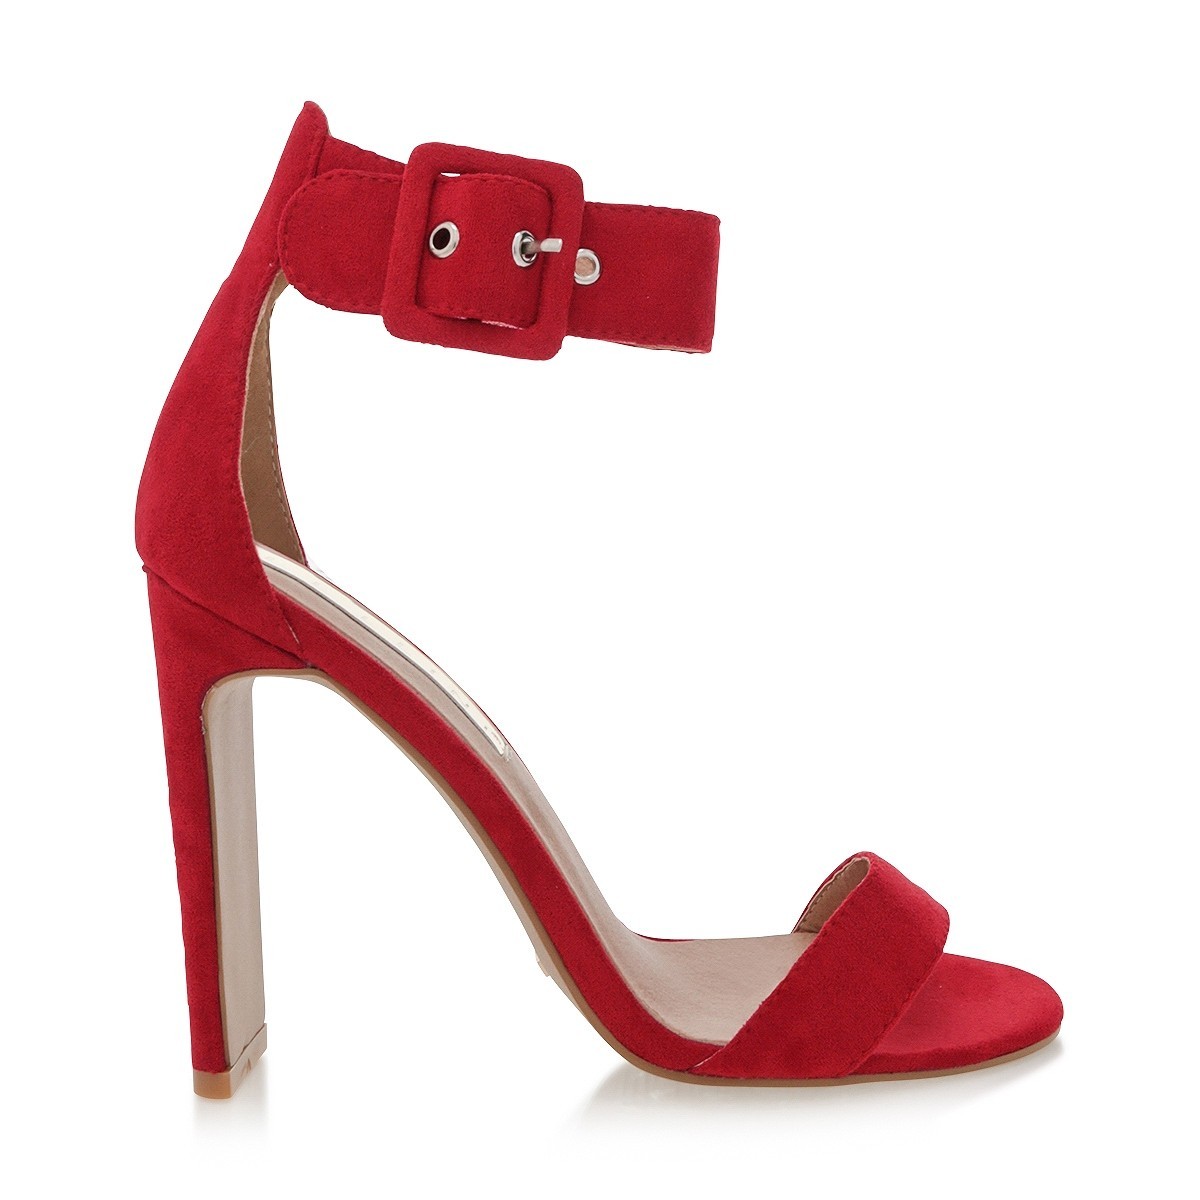 Dharma Red Suede by Billini Shoes on Sale | ShoeSales